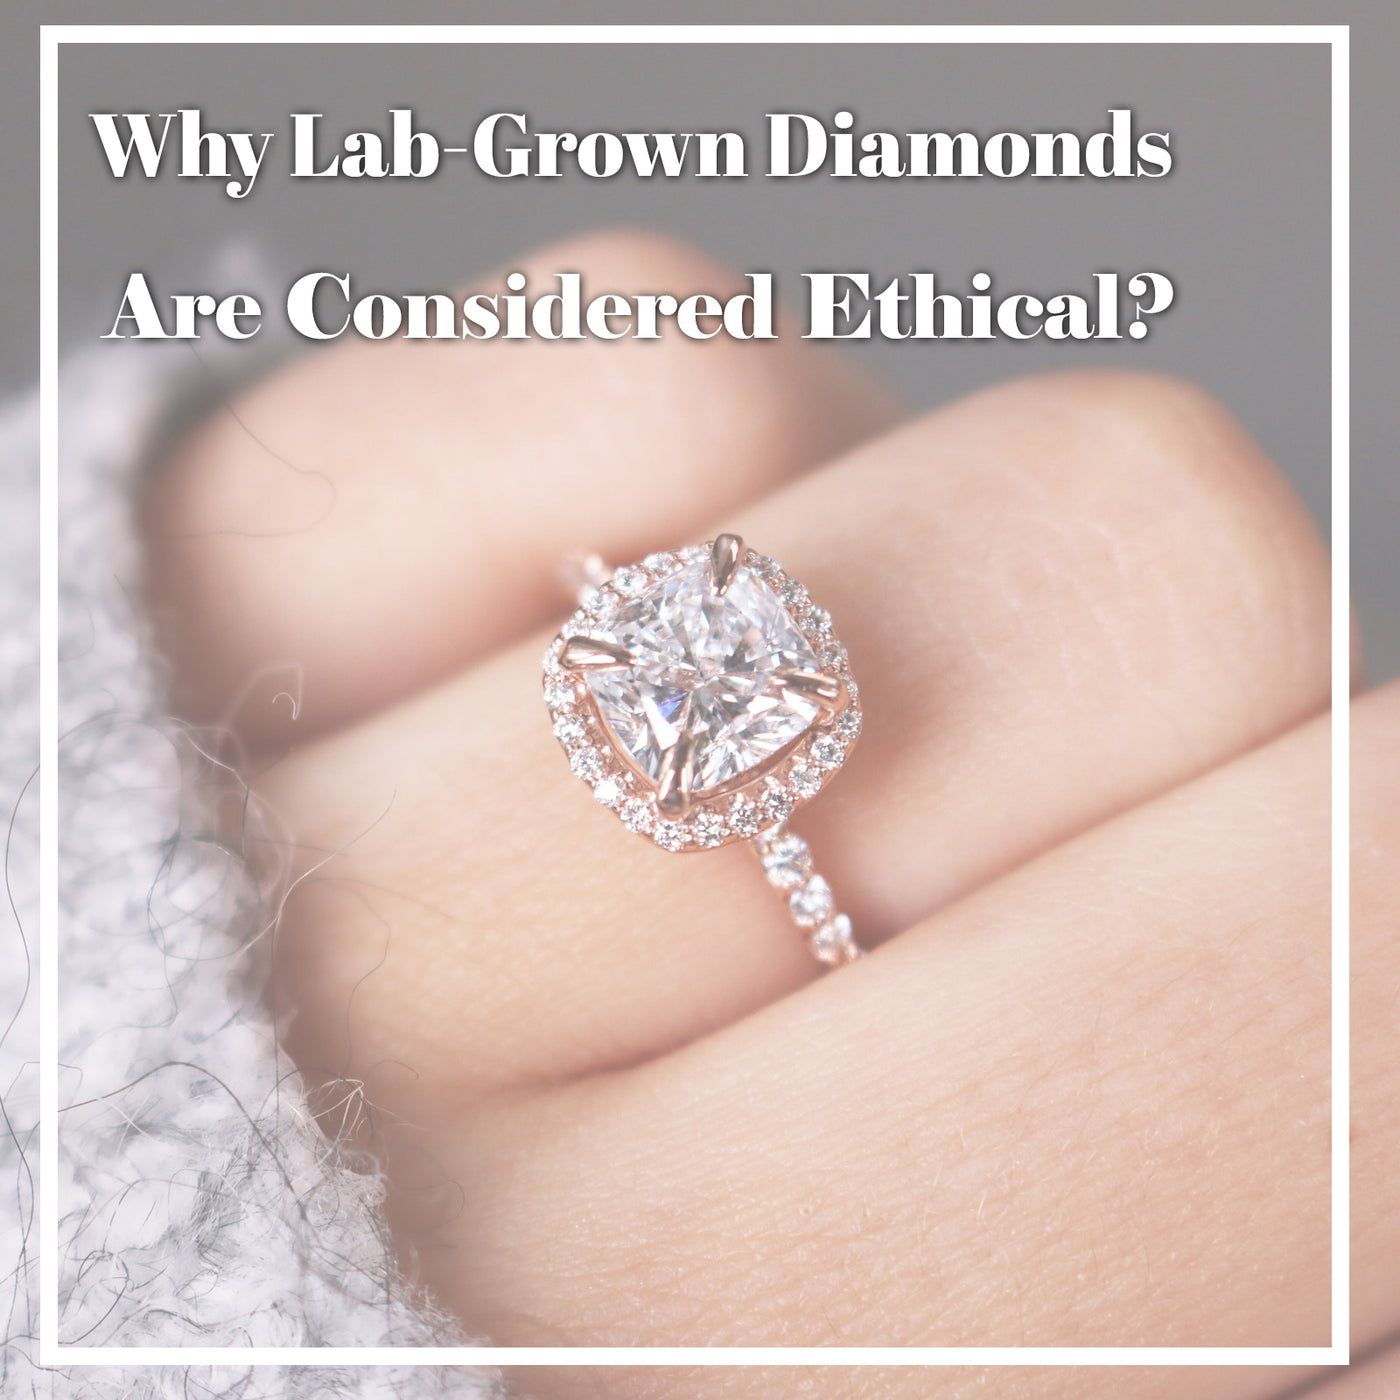 Why Lab-Grown Diamonds Are Considered Ethical?